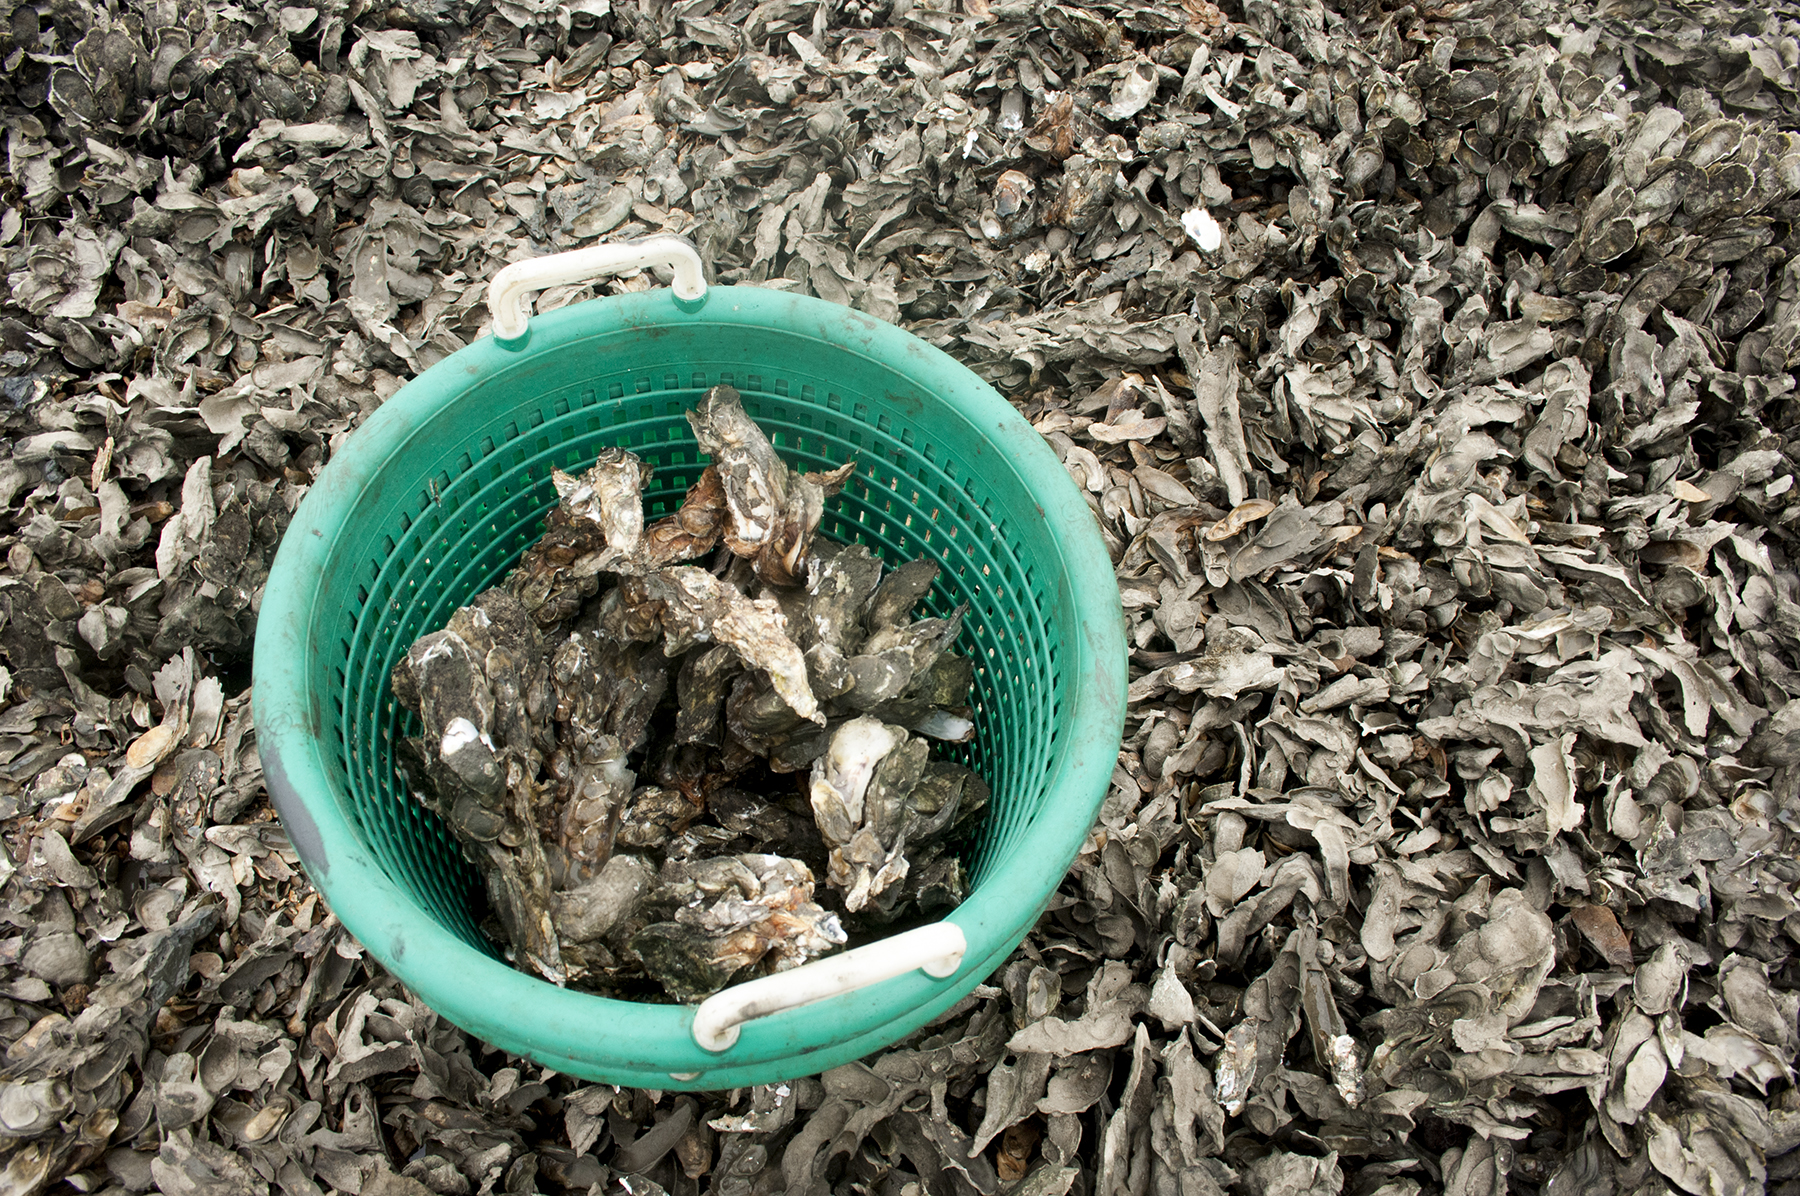 Commercial oyster harvest will close June 1